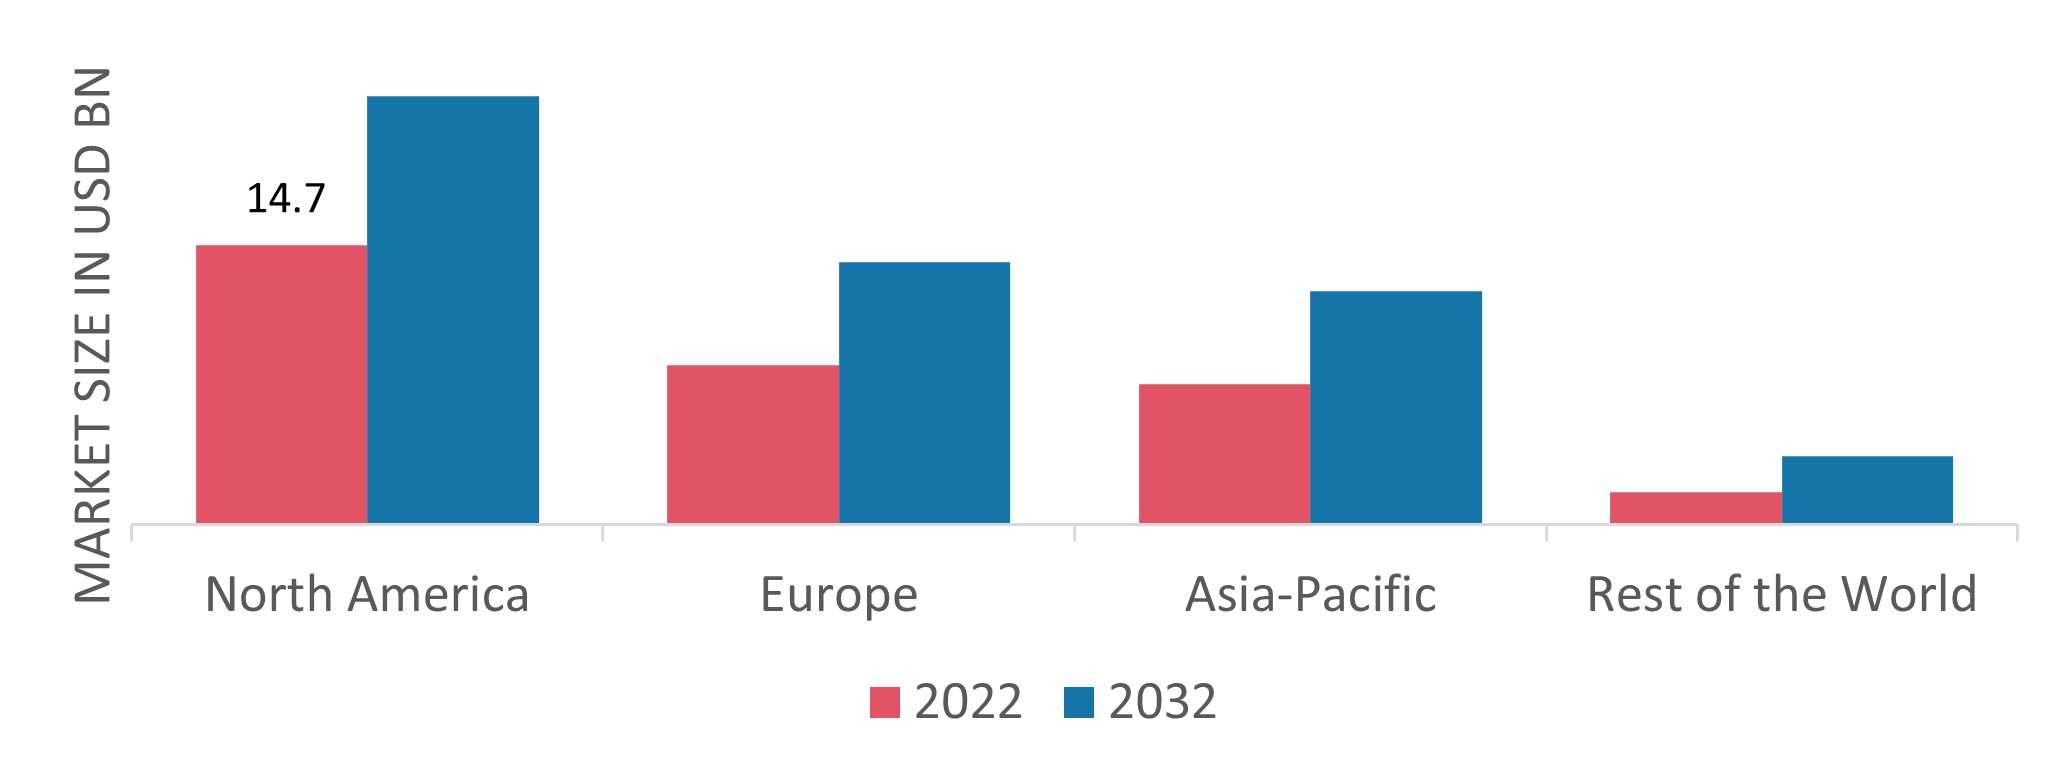 SPECIALTY SURFACTANT MARKET SHARE BY REGION 2022